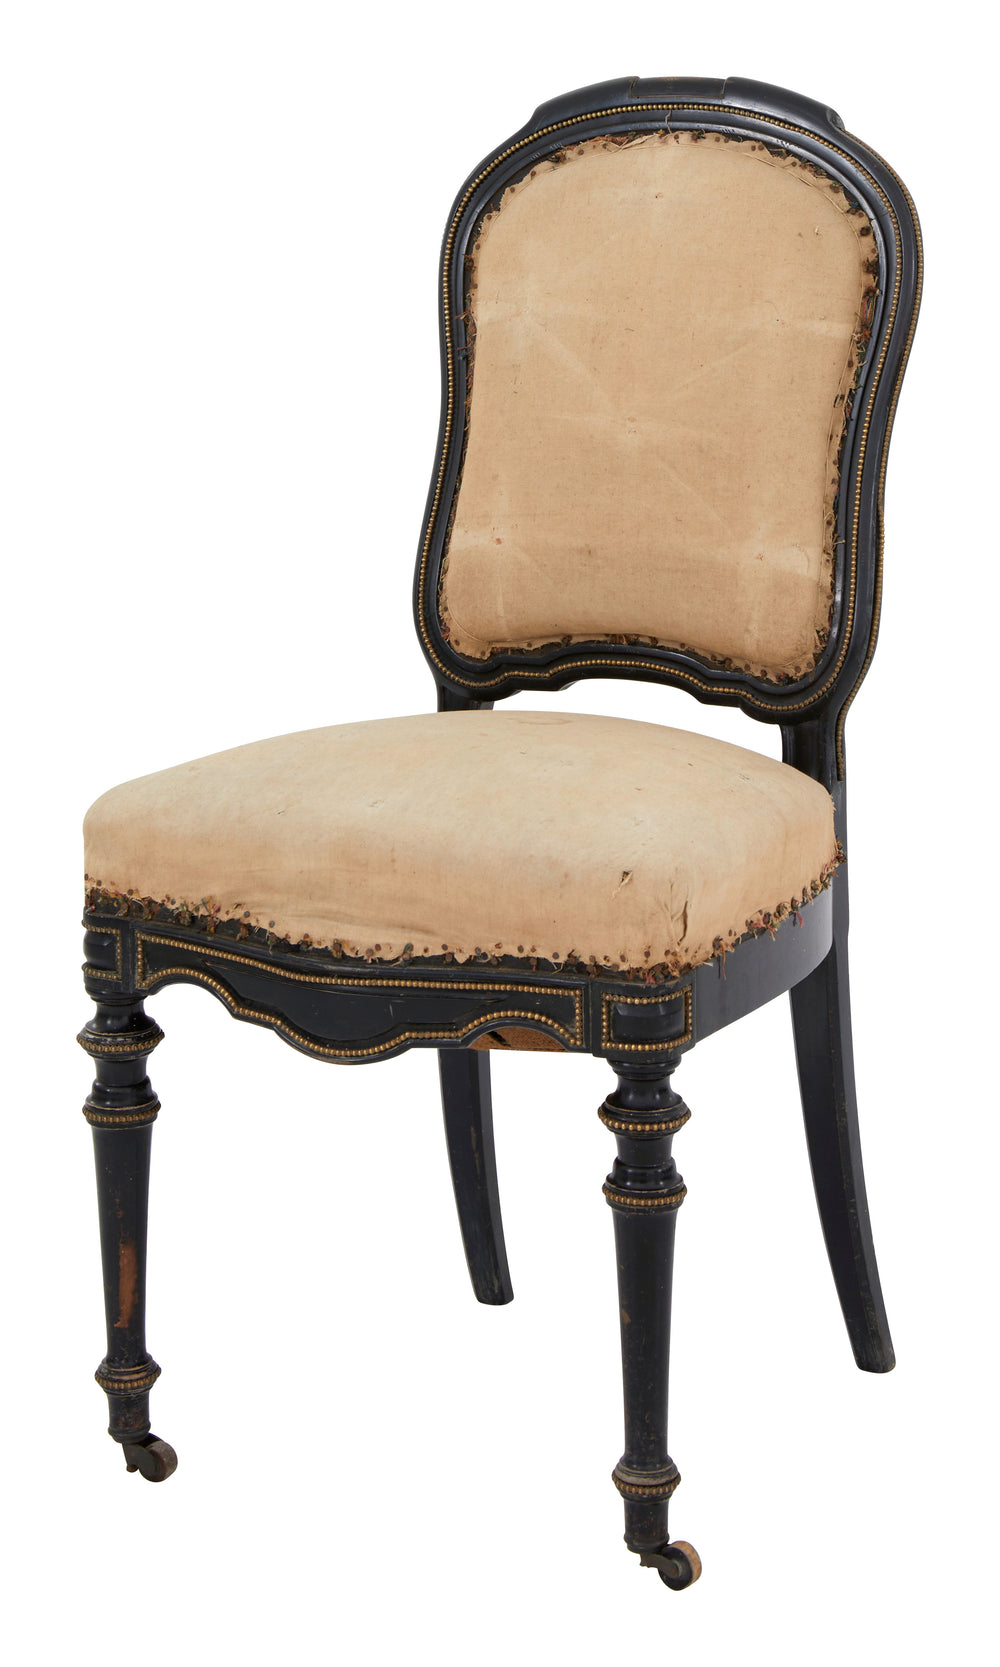 Antique Napolean III Unupholstered Dining Chair